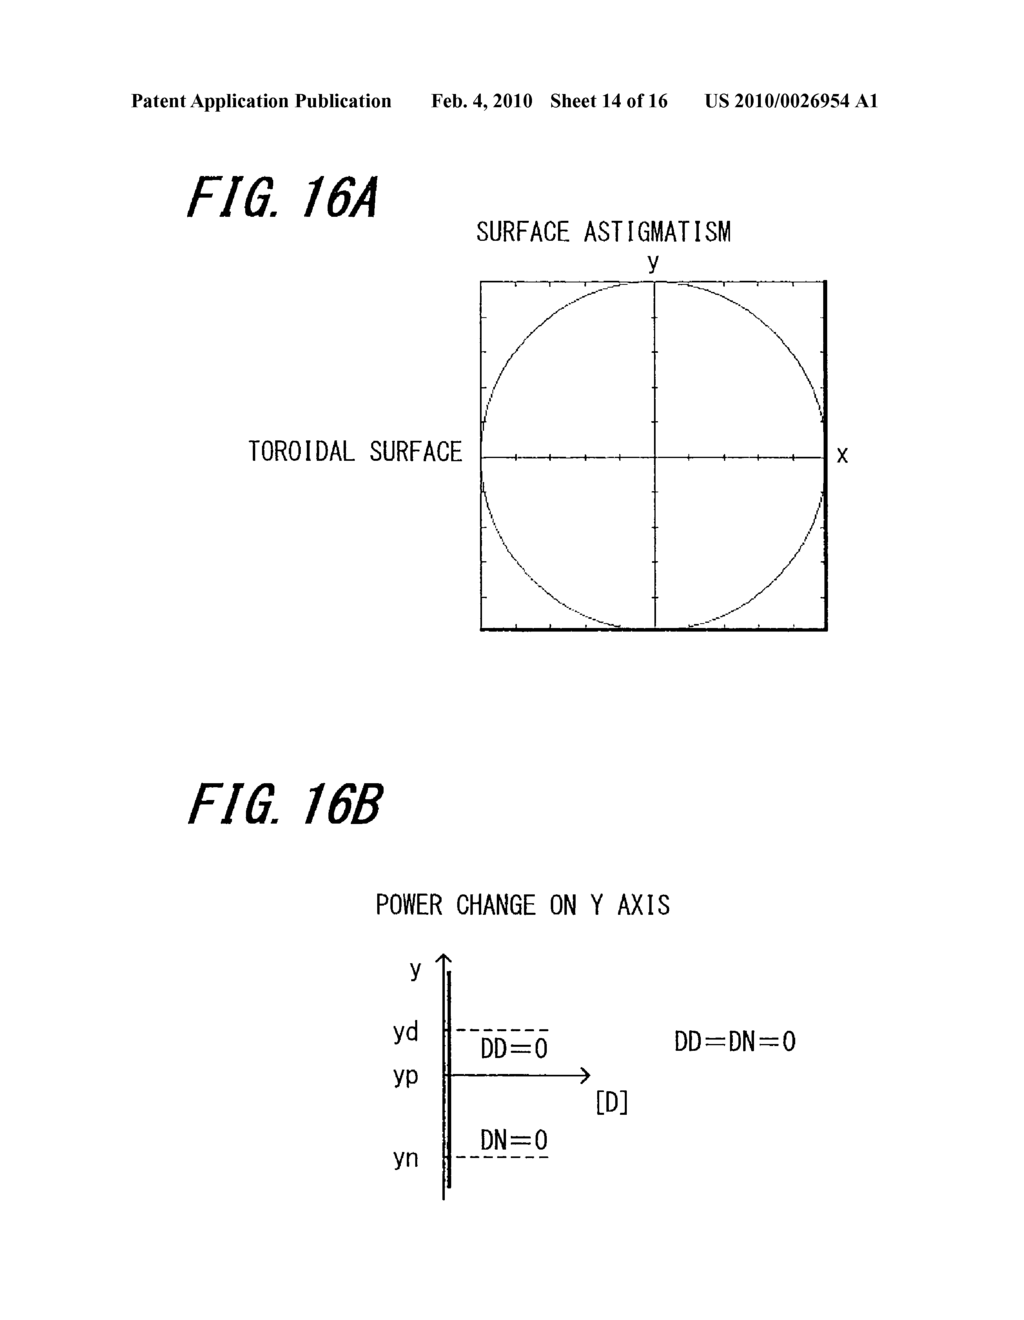 PROGRESSIVE-ADDITION LENS, METHOD FOR PREPARING SHAPE DATA THEREOF, METHOD FOR MANUFACTURING THE LENS, AND APPARATUS AND COMPUTER PROGRAM PRODUCT FOR PREPARING SUCH SHAPE DATA - diagram, schematic, and image 15